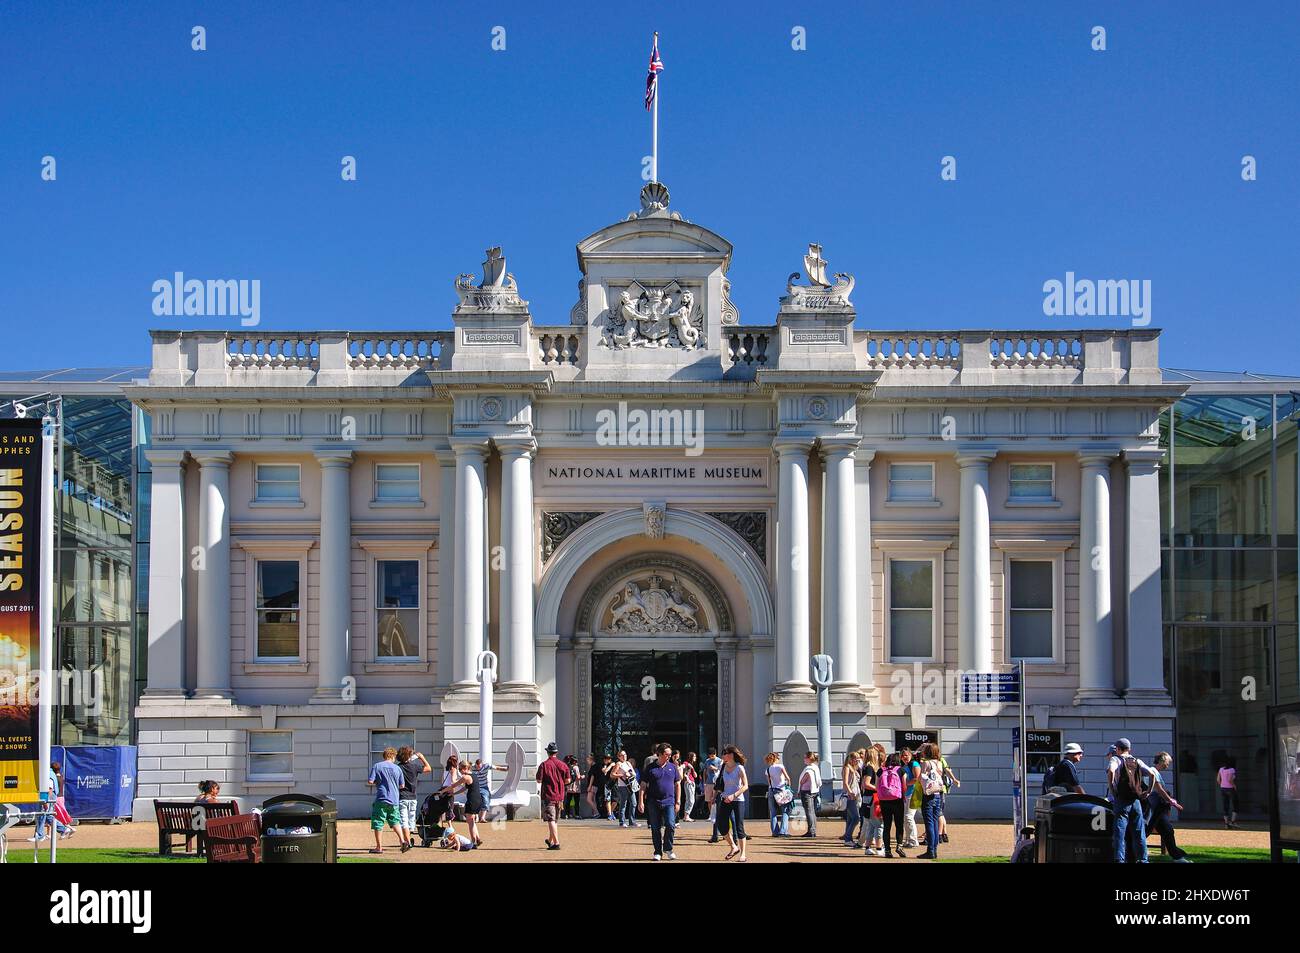 National Maritime Museum, Greenwich Park, Greenwich, London Borough of Greenwich, Greater London, Angleterre, Royaume-Uni Banque D'Images